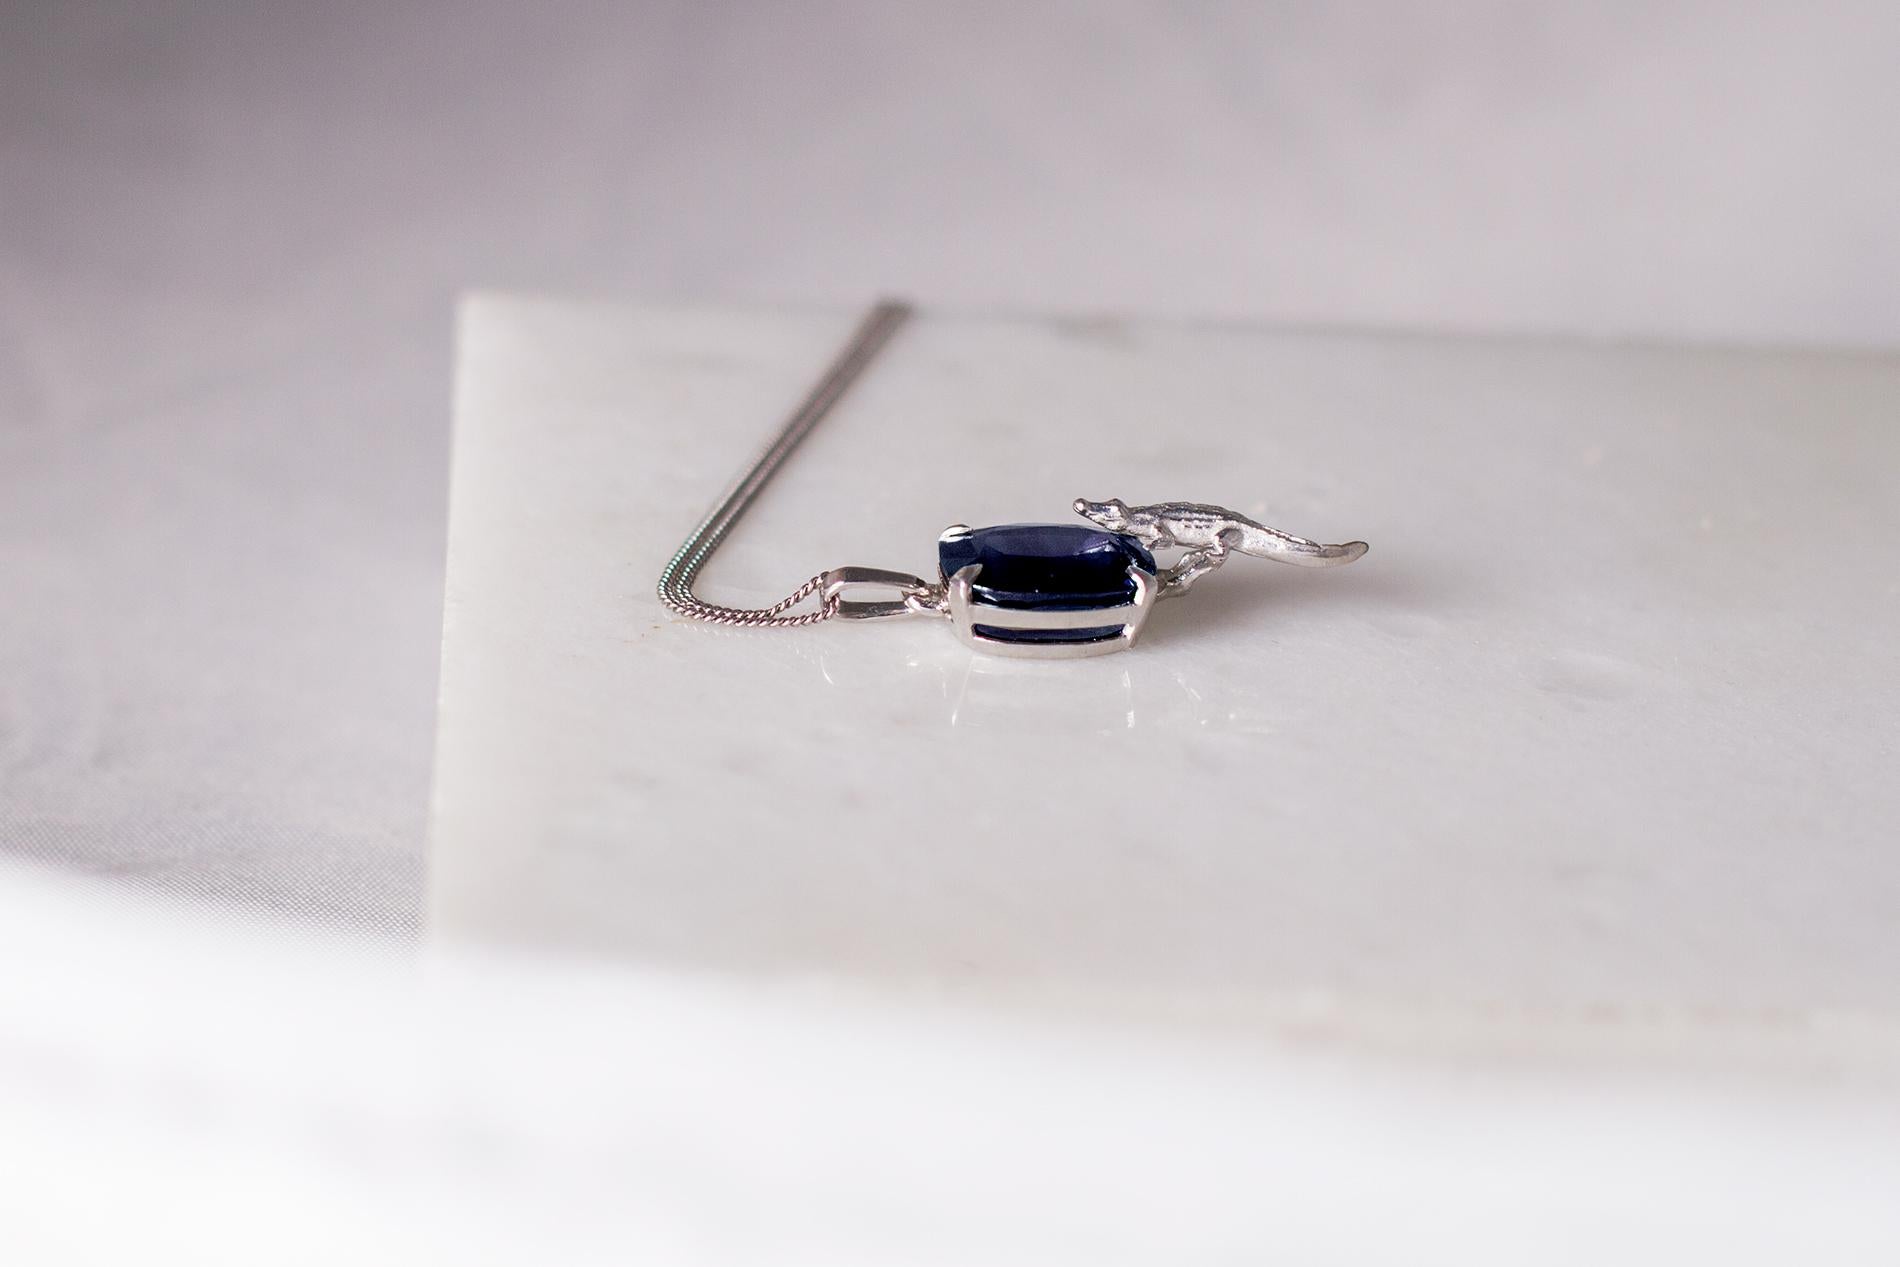 This 18 karat white gold contemporary Mesopotamian pendant necklace is encrusted with 4.32 carats natural dark blue cushion sapphire, 12.8x8.5 mm. The gem catches eye's attention and well designed in contemporary design pendant necklace.

You can